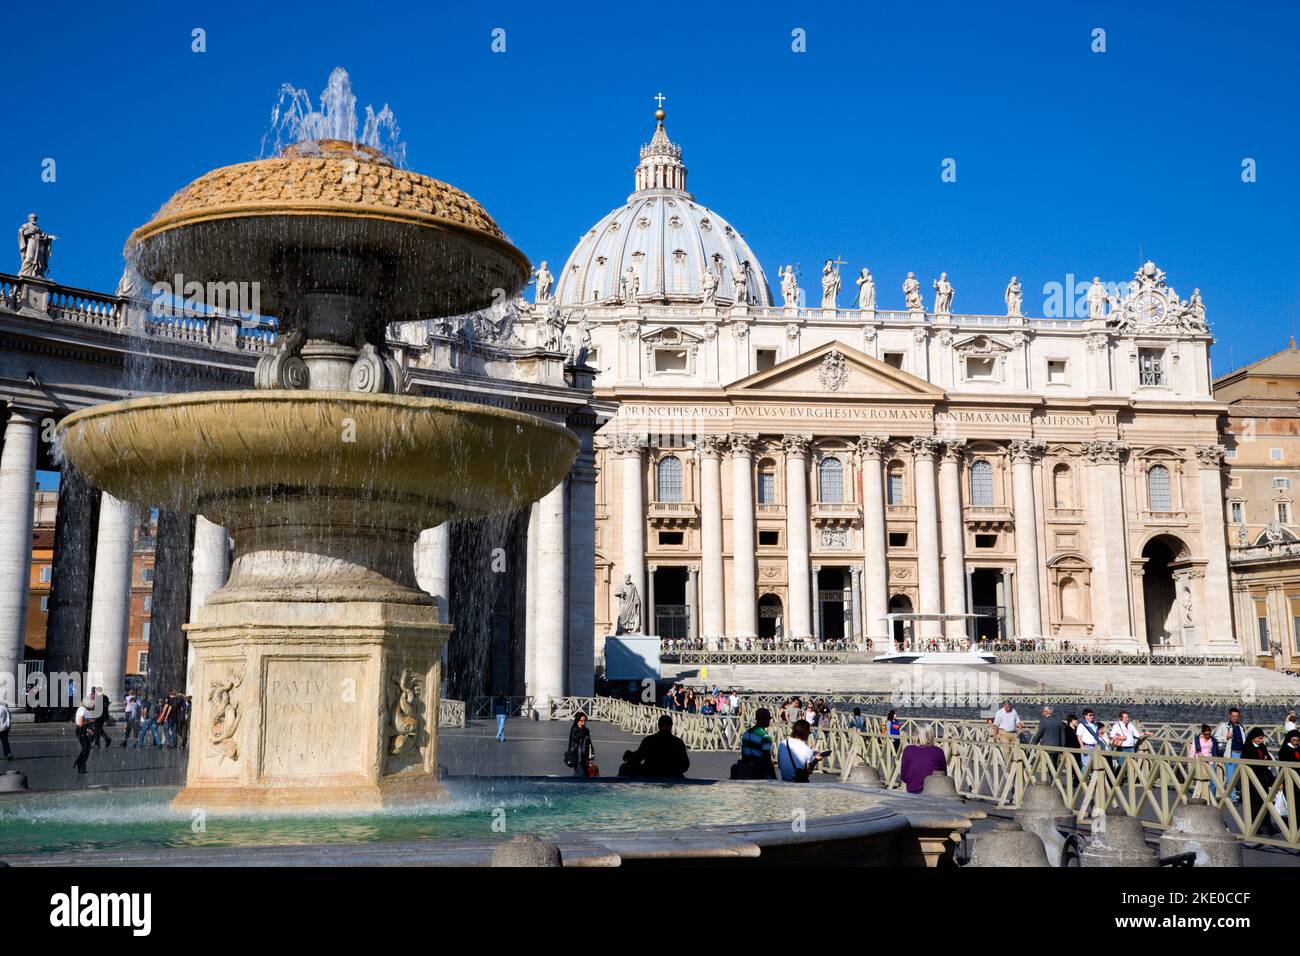 ITALY Lazio Rome Vatican City The Basilica of St Peter and the square or Piazza San Pietro with tourists around a water fountain in the foreground Stock Photo